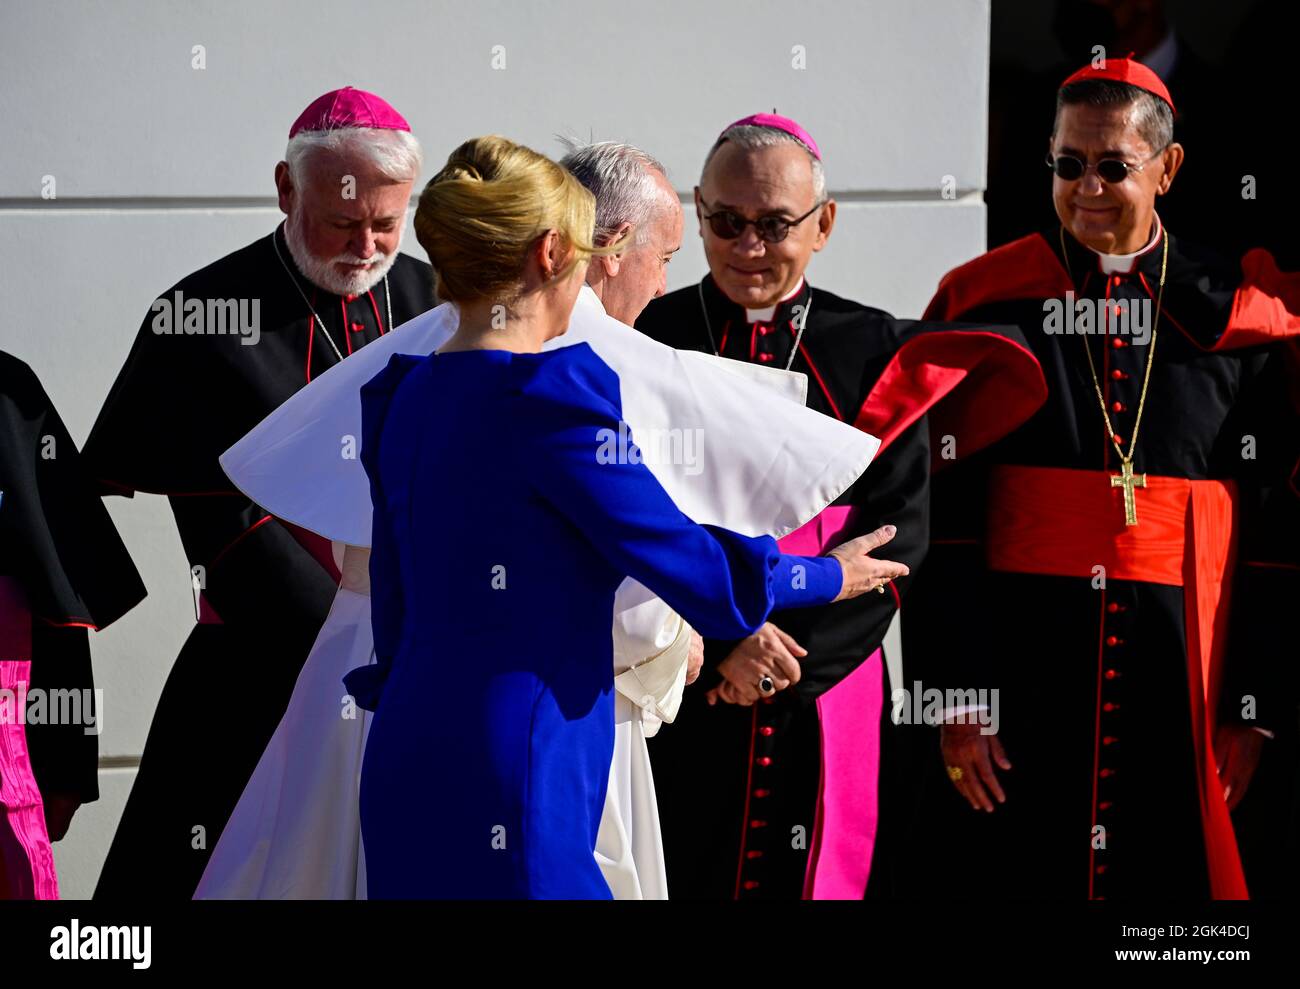 Bratislava, Slovakia. 13th Sep, 2021. Slovak President Zuzana Caputova  today, on Monday, September 13, 2021, welcomed Pope Francis during his  four-day visit to Slovakia, which started on Sunday, and then had an